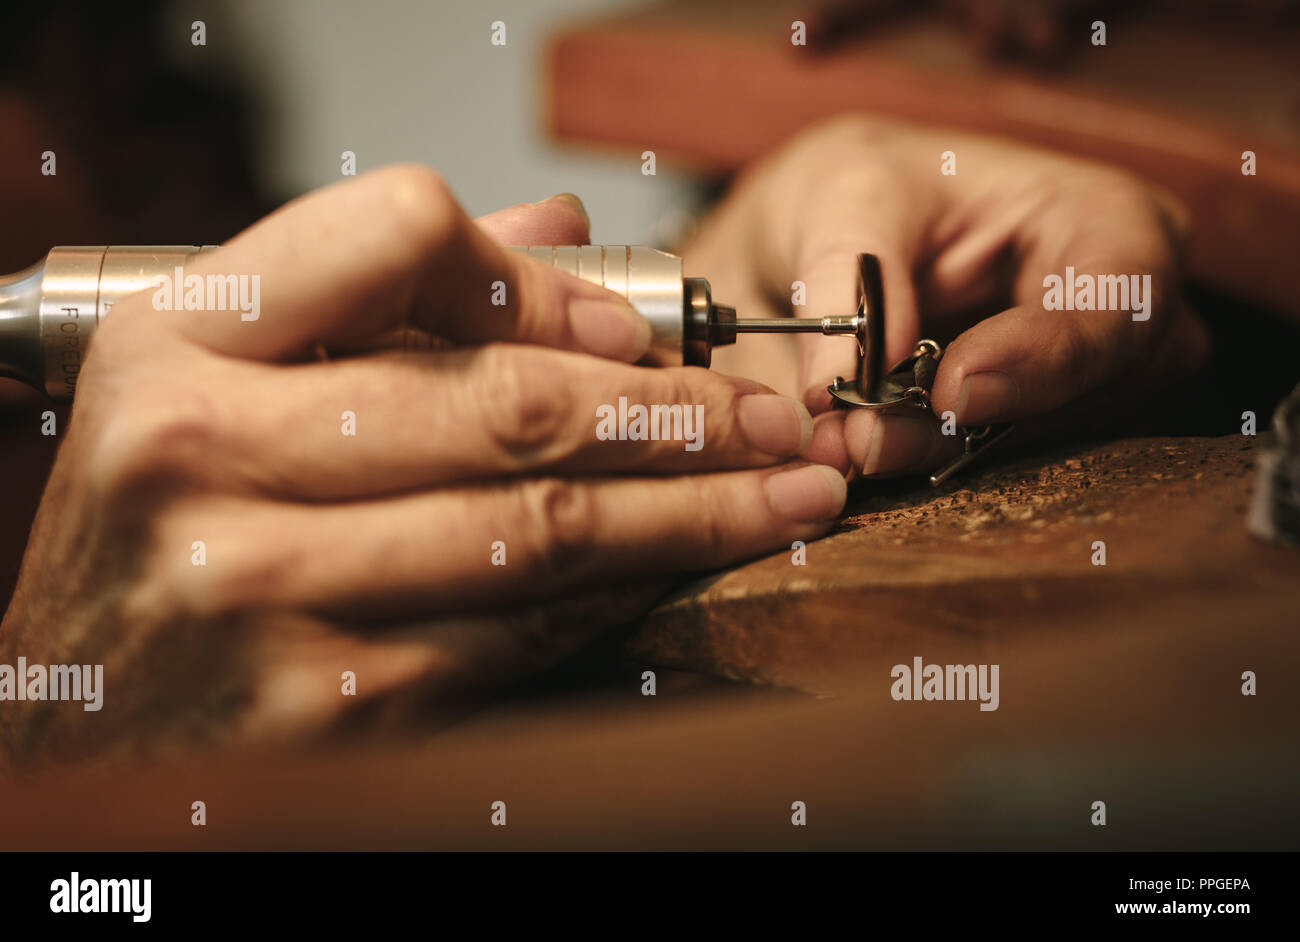 Hands of female jeweler polishing a jewelry piece with grinder machine. Goldsmith making a piece of jewelry at her workbench. Stock Photo